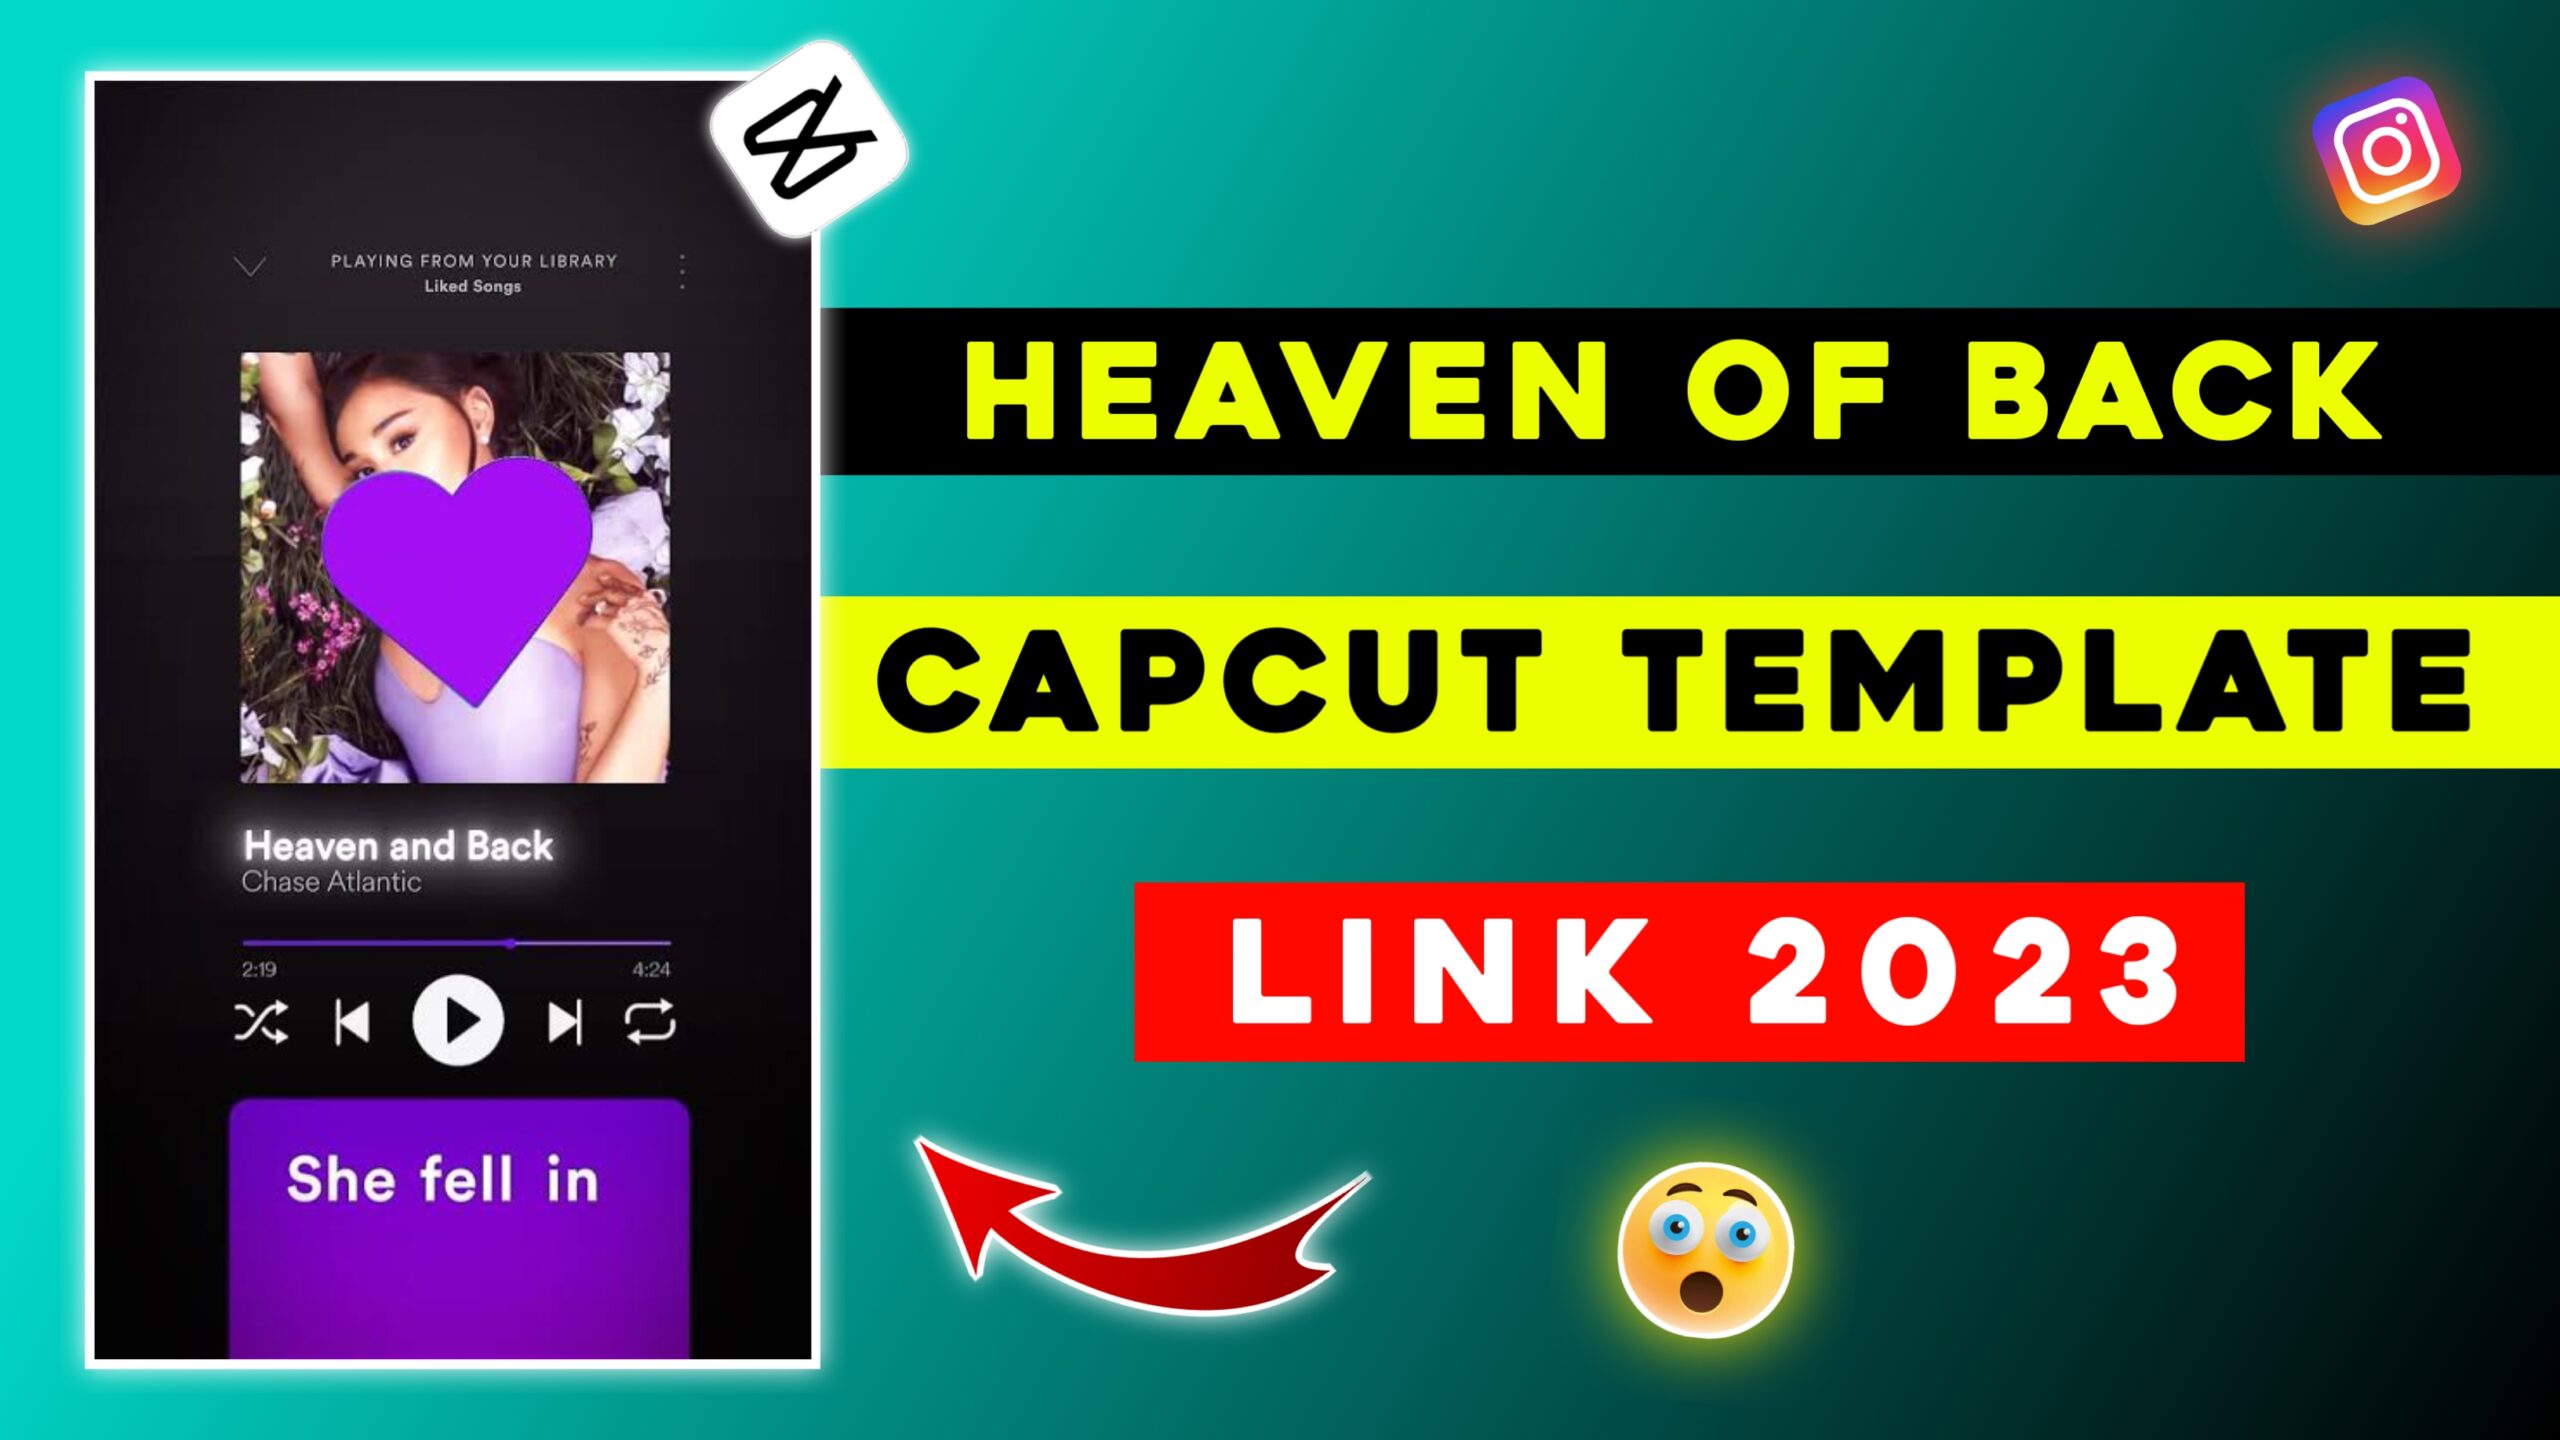 Heaven And Back CapCut Template Link 2023